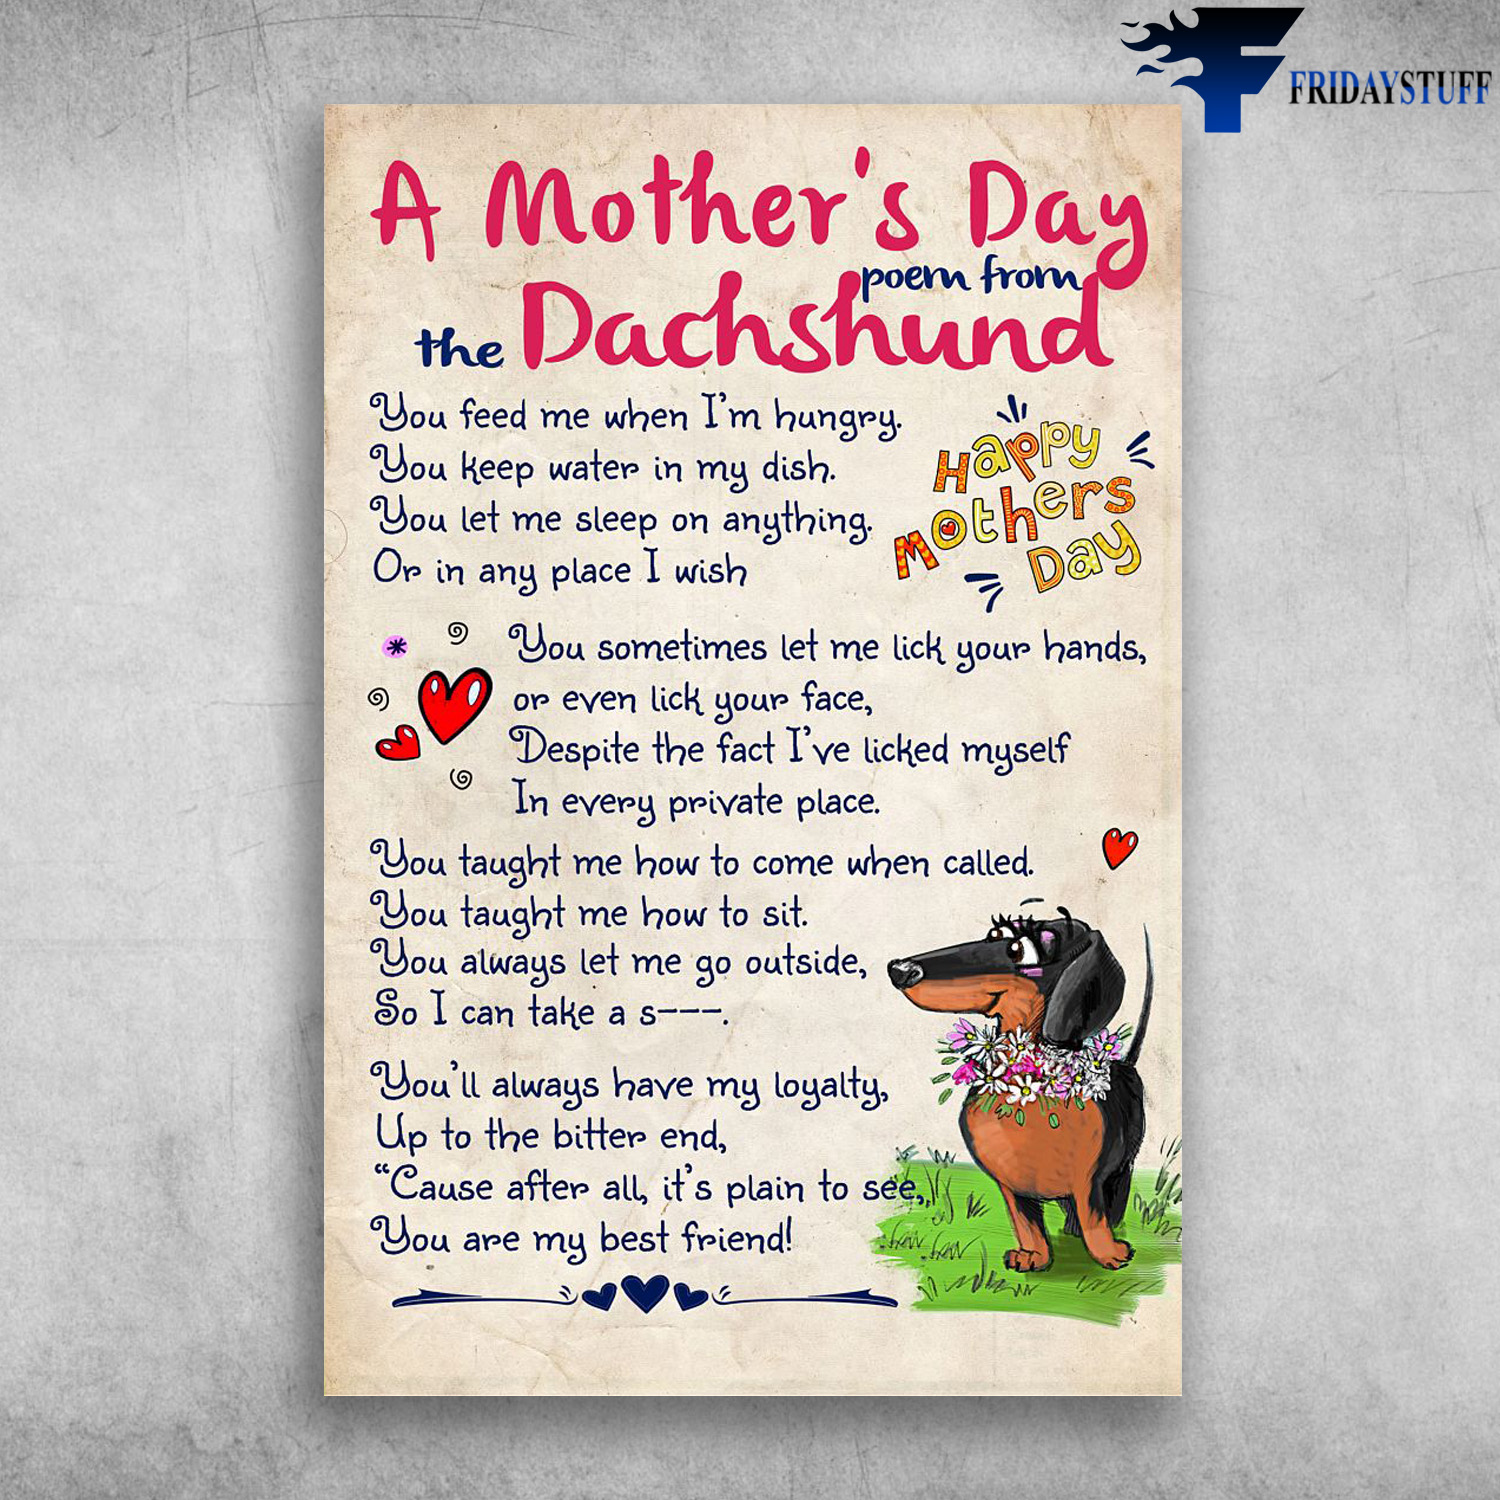 Dachshund Dog - A Mother's Day Poem From The Dachshund, You Feed Me When I’m Hungry, You Keep Water In My Dish, You Let Me Sleep On Anything, Or In Any Place I Wish, You Sometimes Let Me Lick Your Hands Or Even Lick Your Face